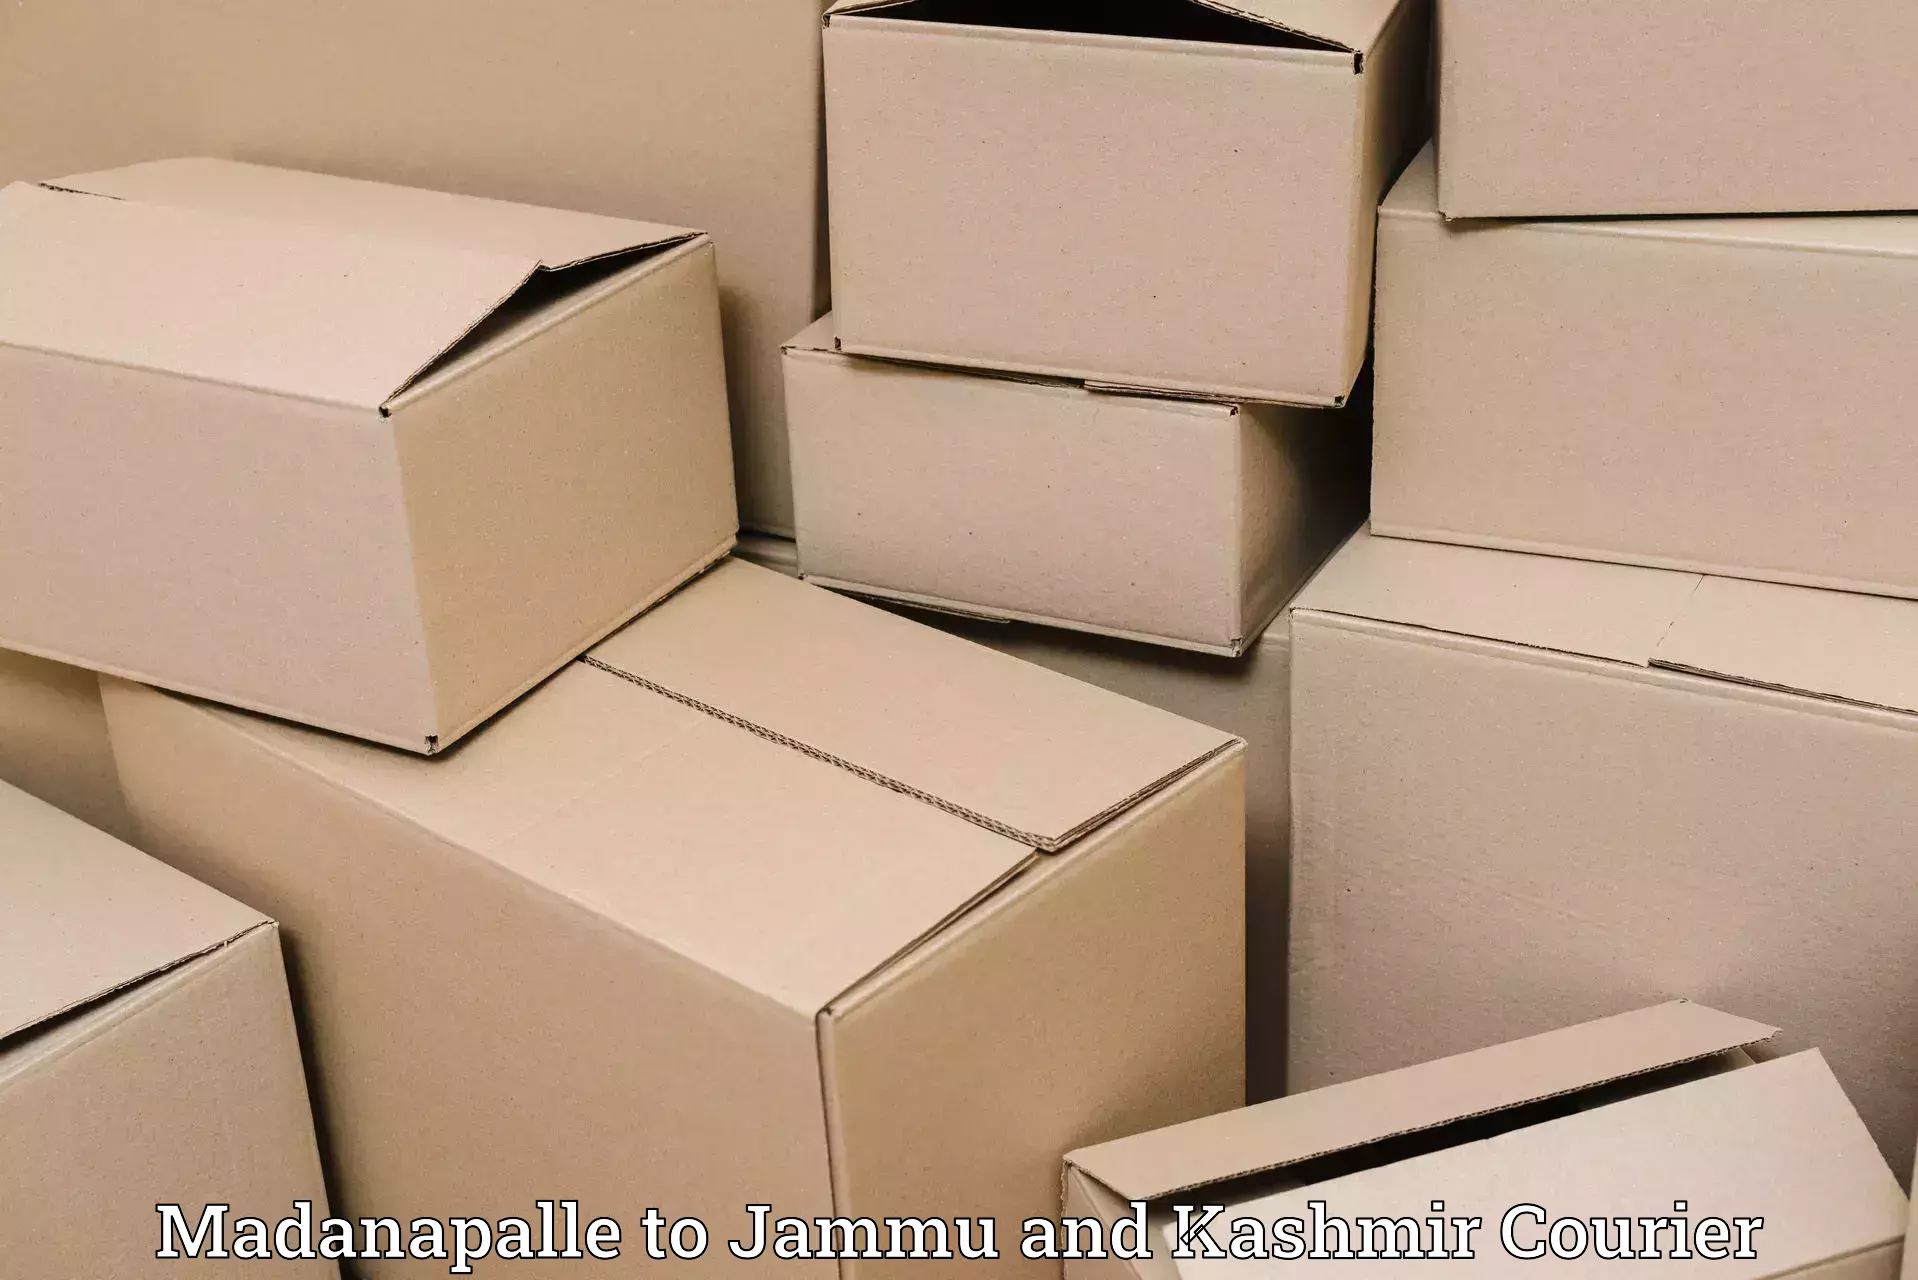 Cash on delivery service Madanapalle to Jammu and Kashmir